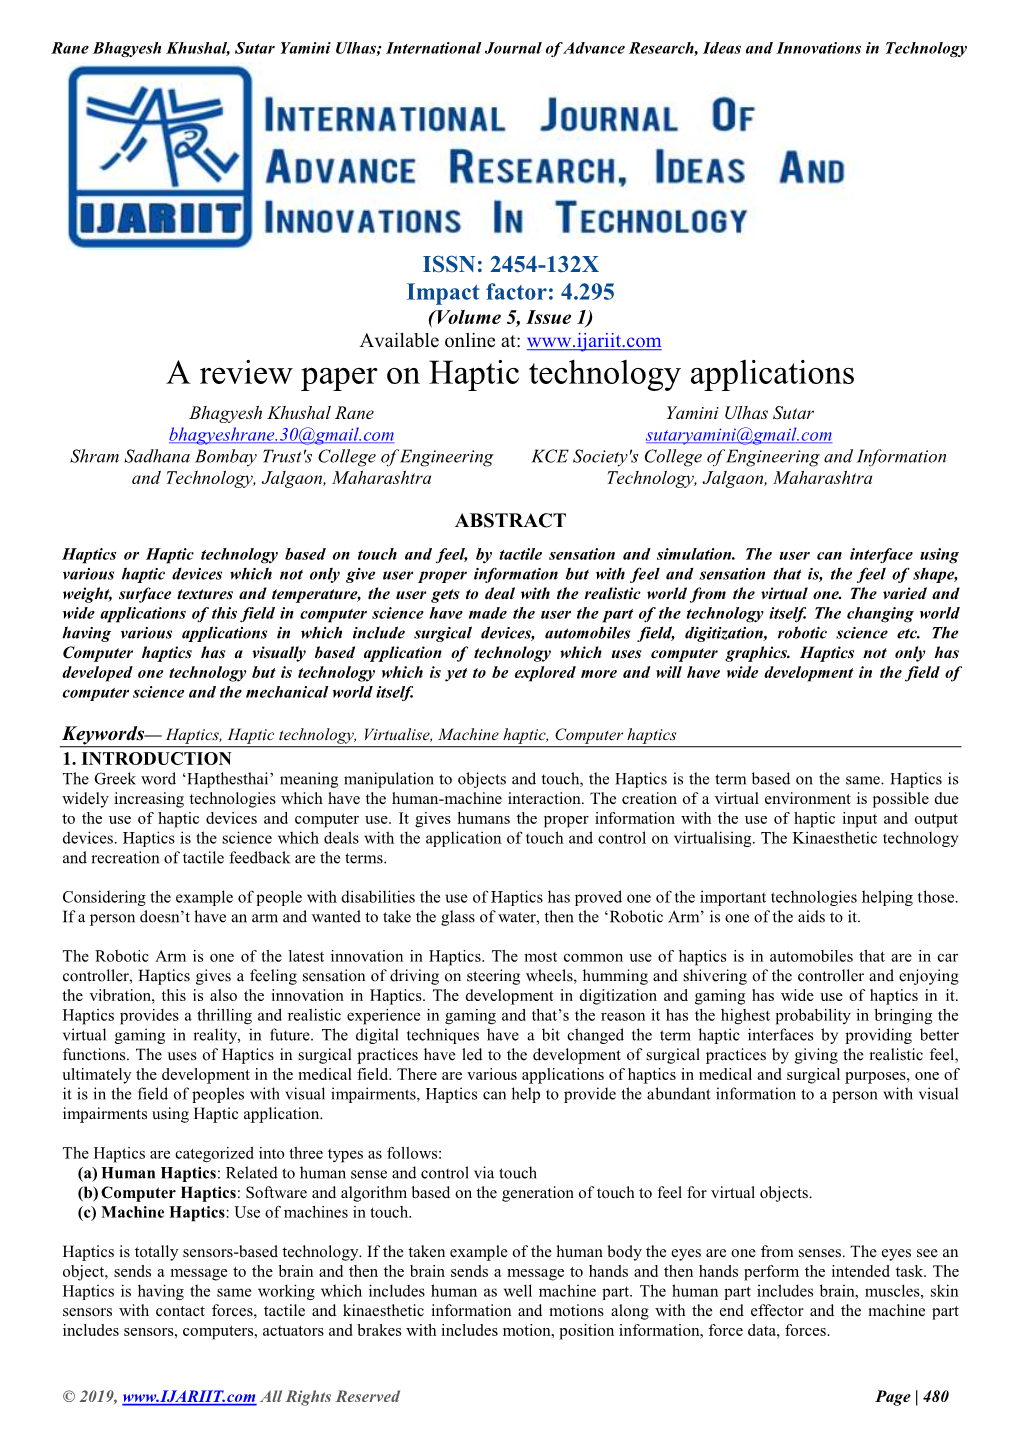 A Review Paper on Haptic Technology Applications